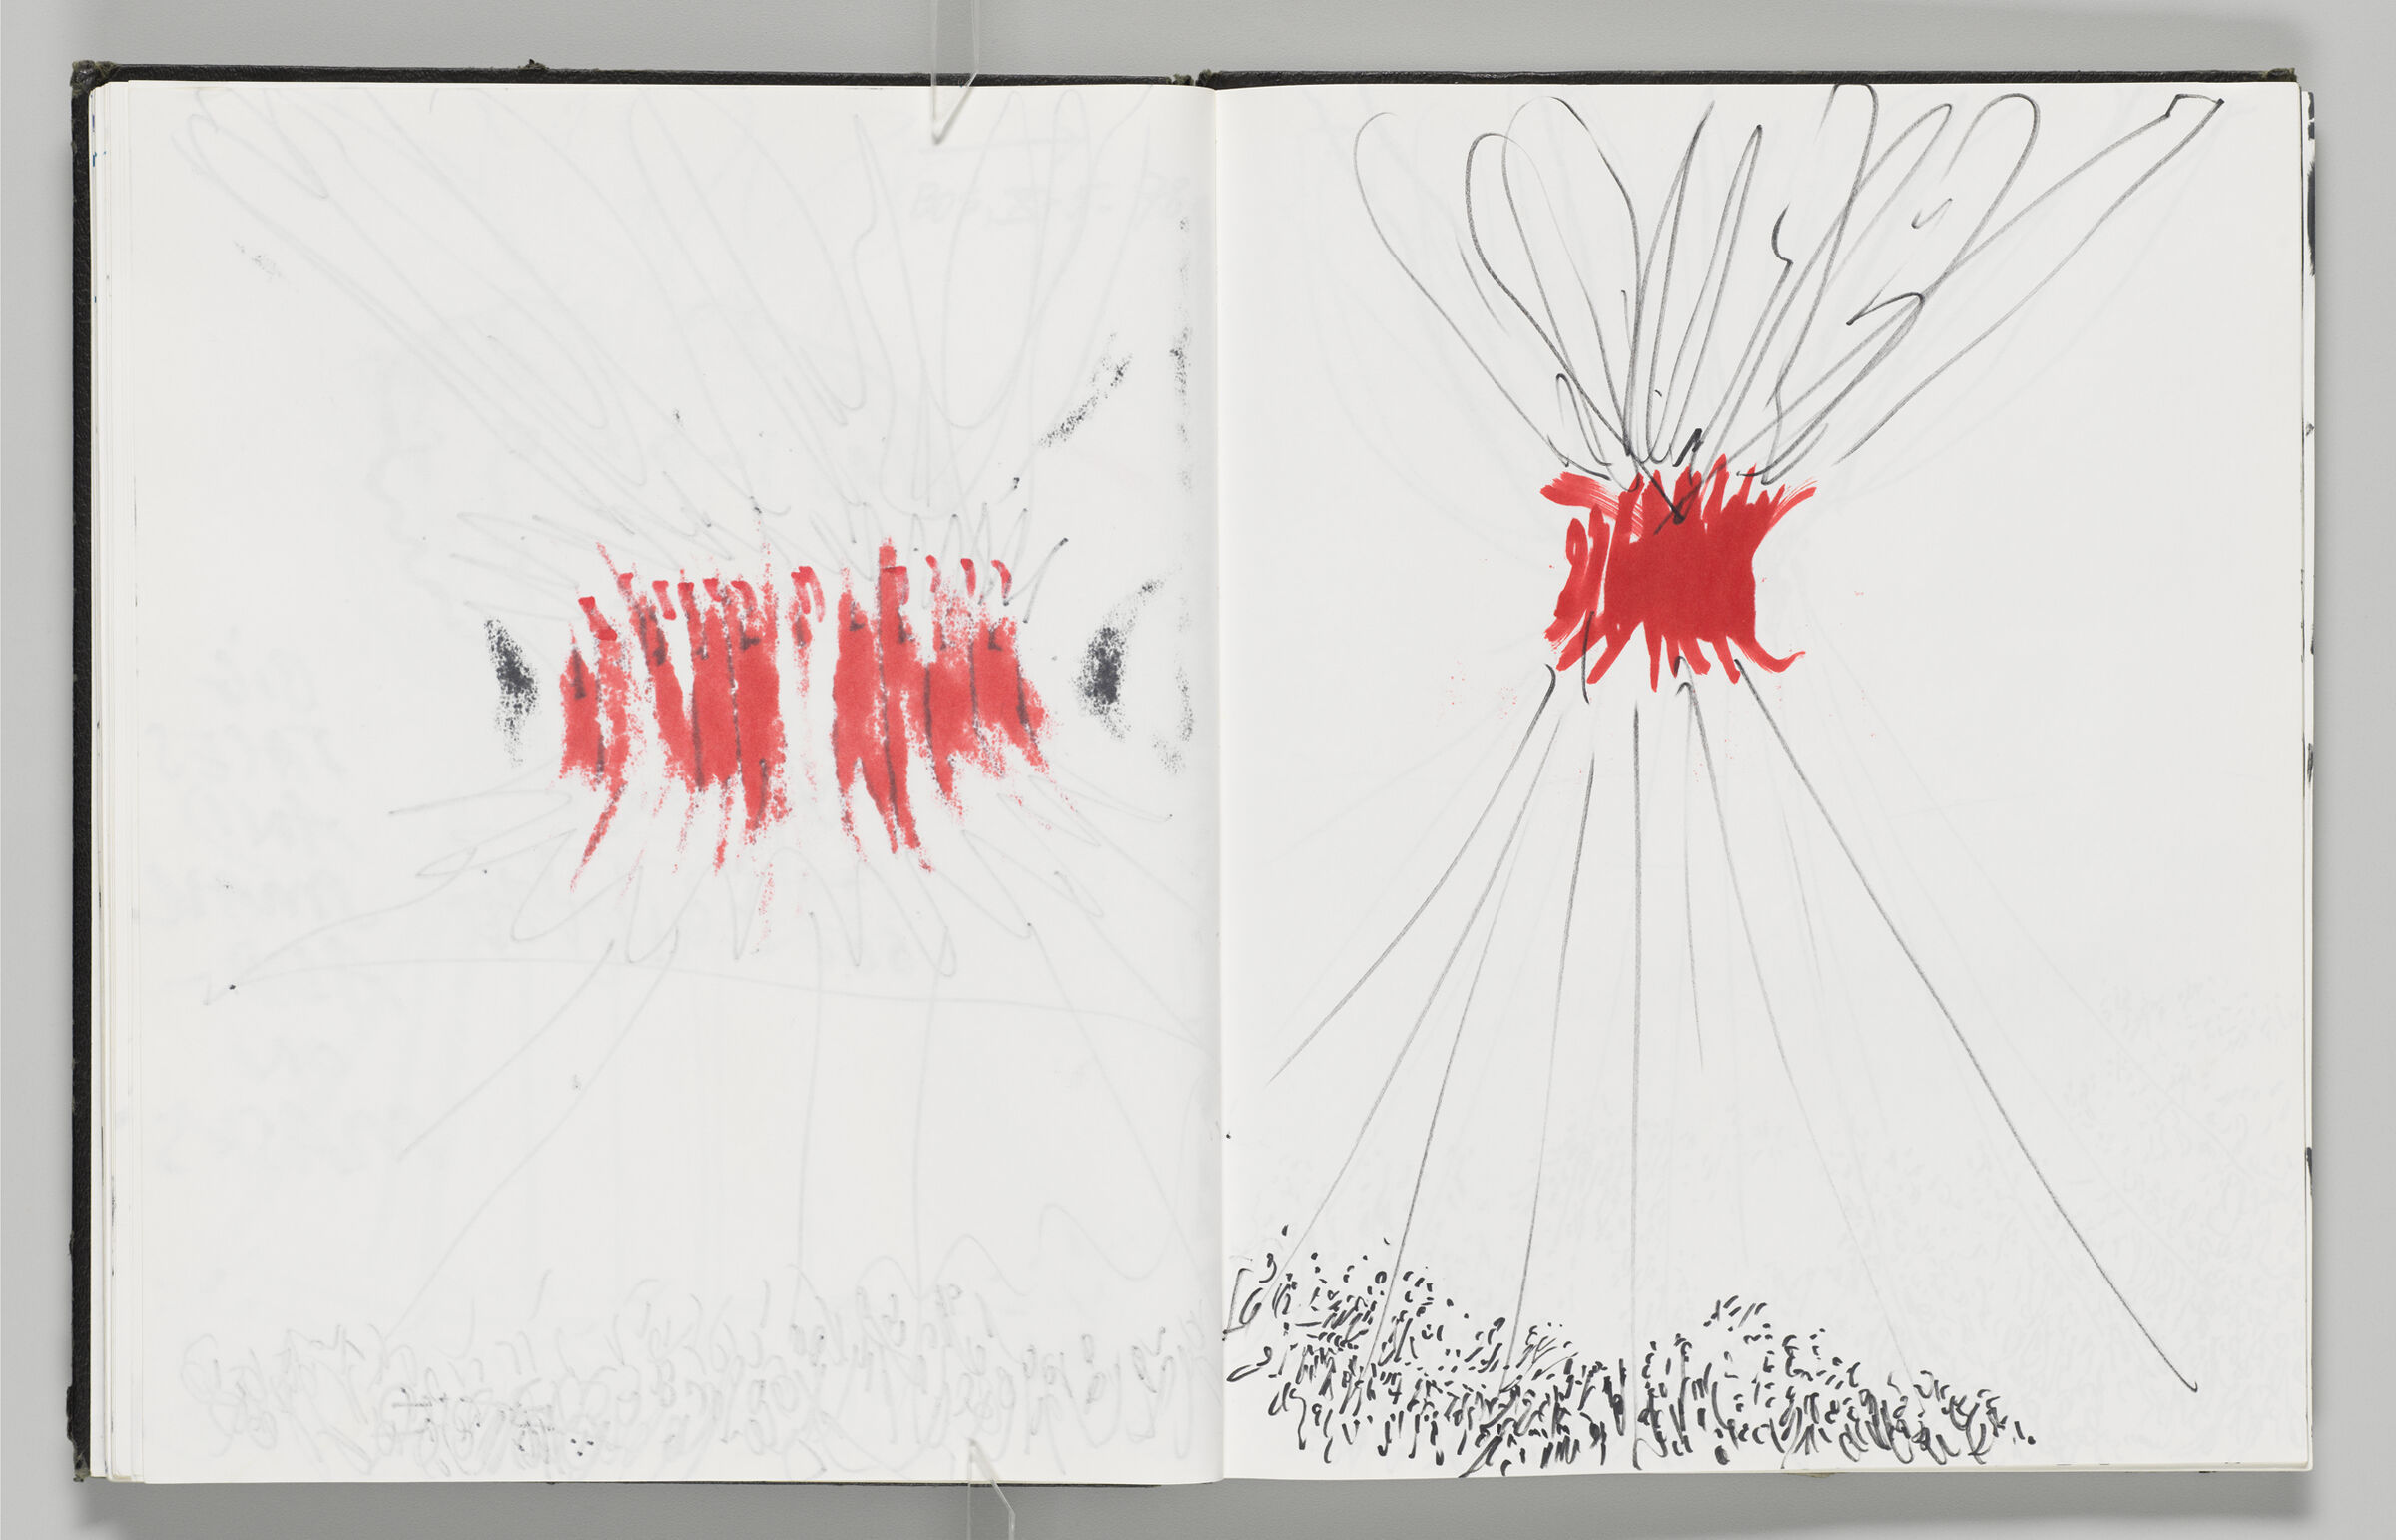 Untitled (Bleed-Through Of Previous Page, Left Page); Untitled (Inflatable With Crowd, Right Page)